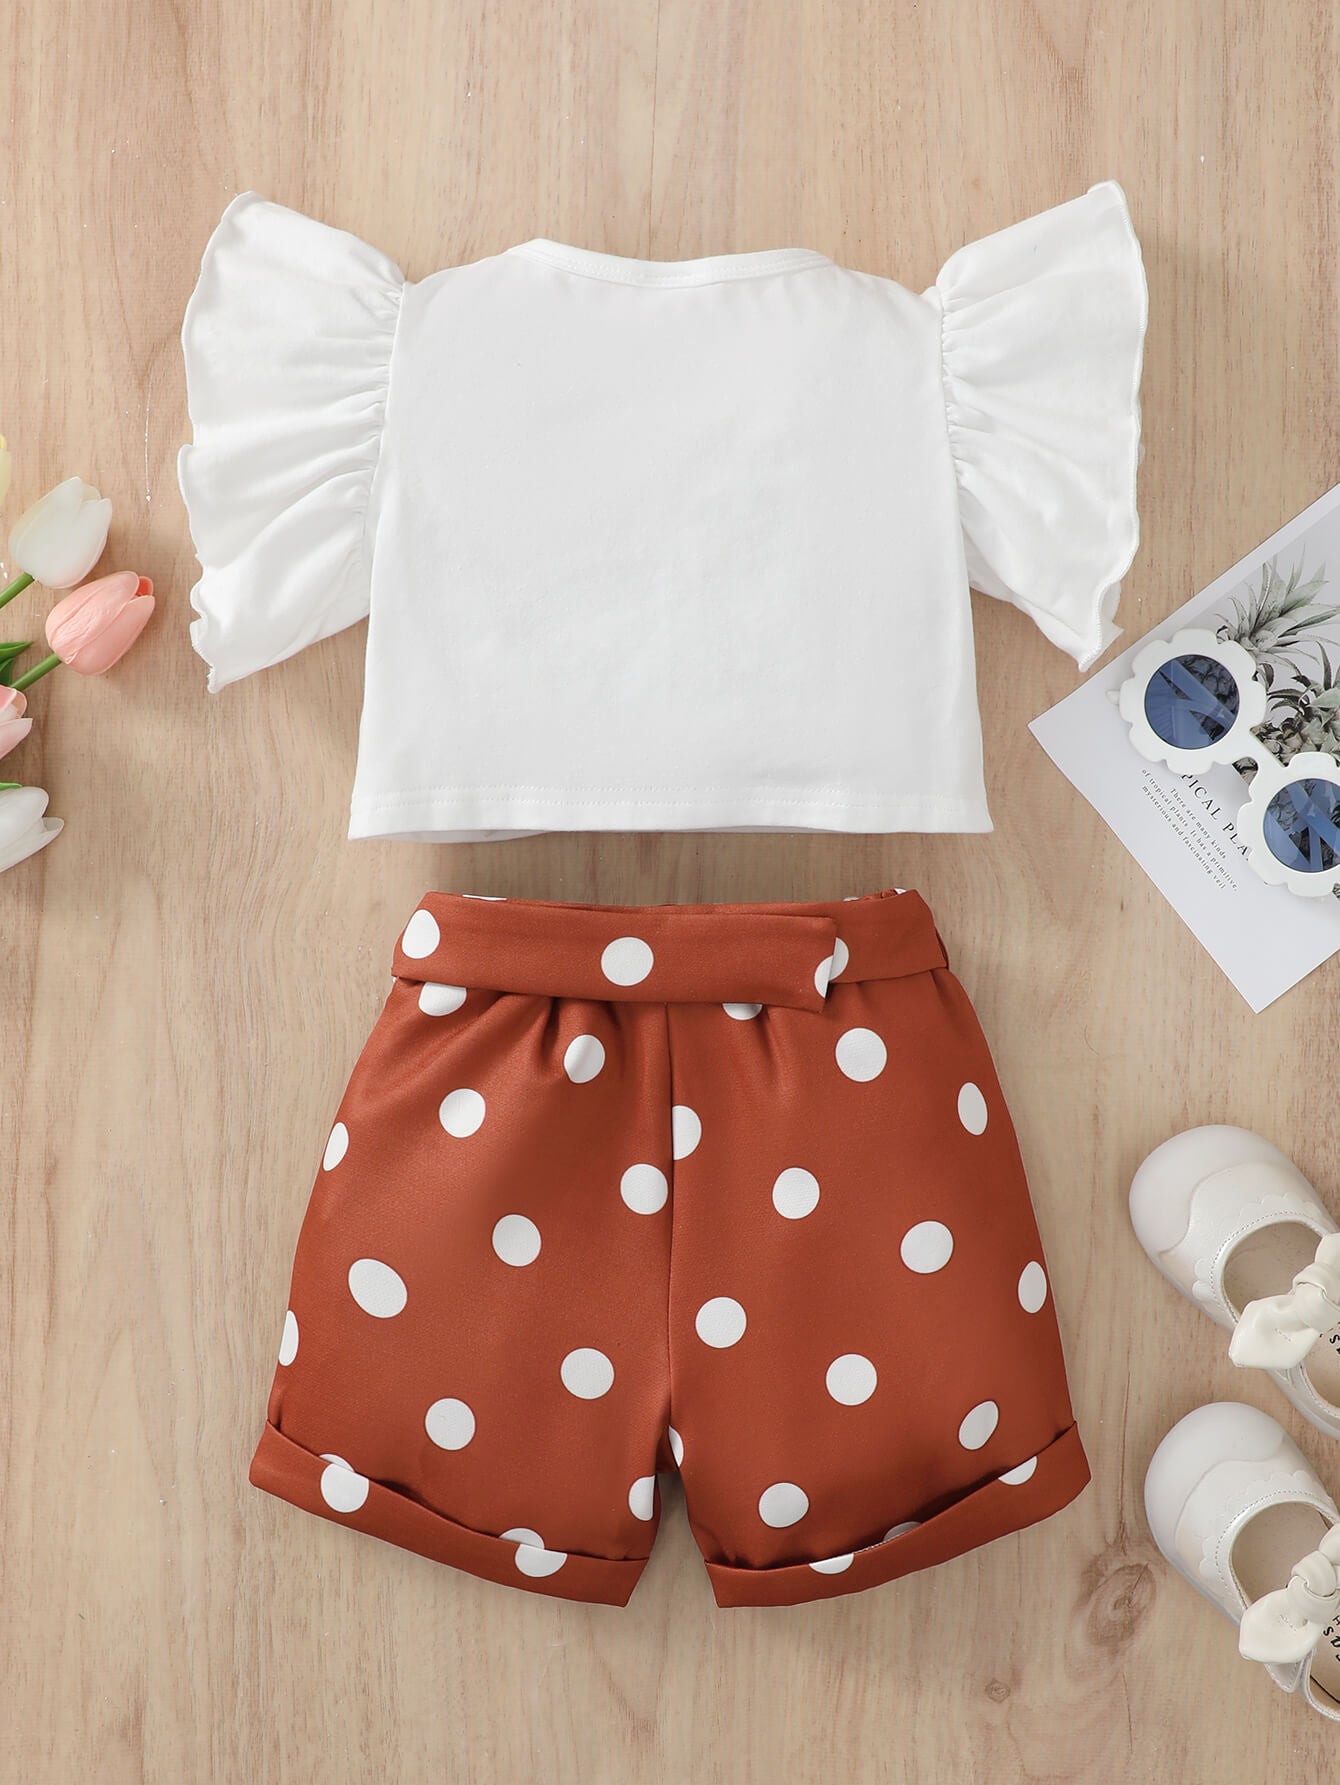 Girls Graphic Butterfly Sleeve Top and Polka Dot Shorts Set - DromedarShop.com Online Boutique